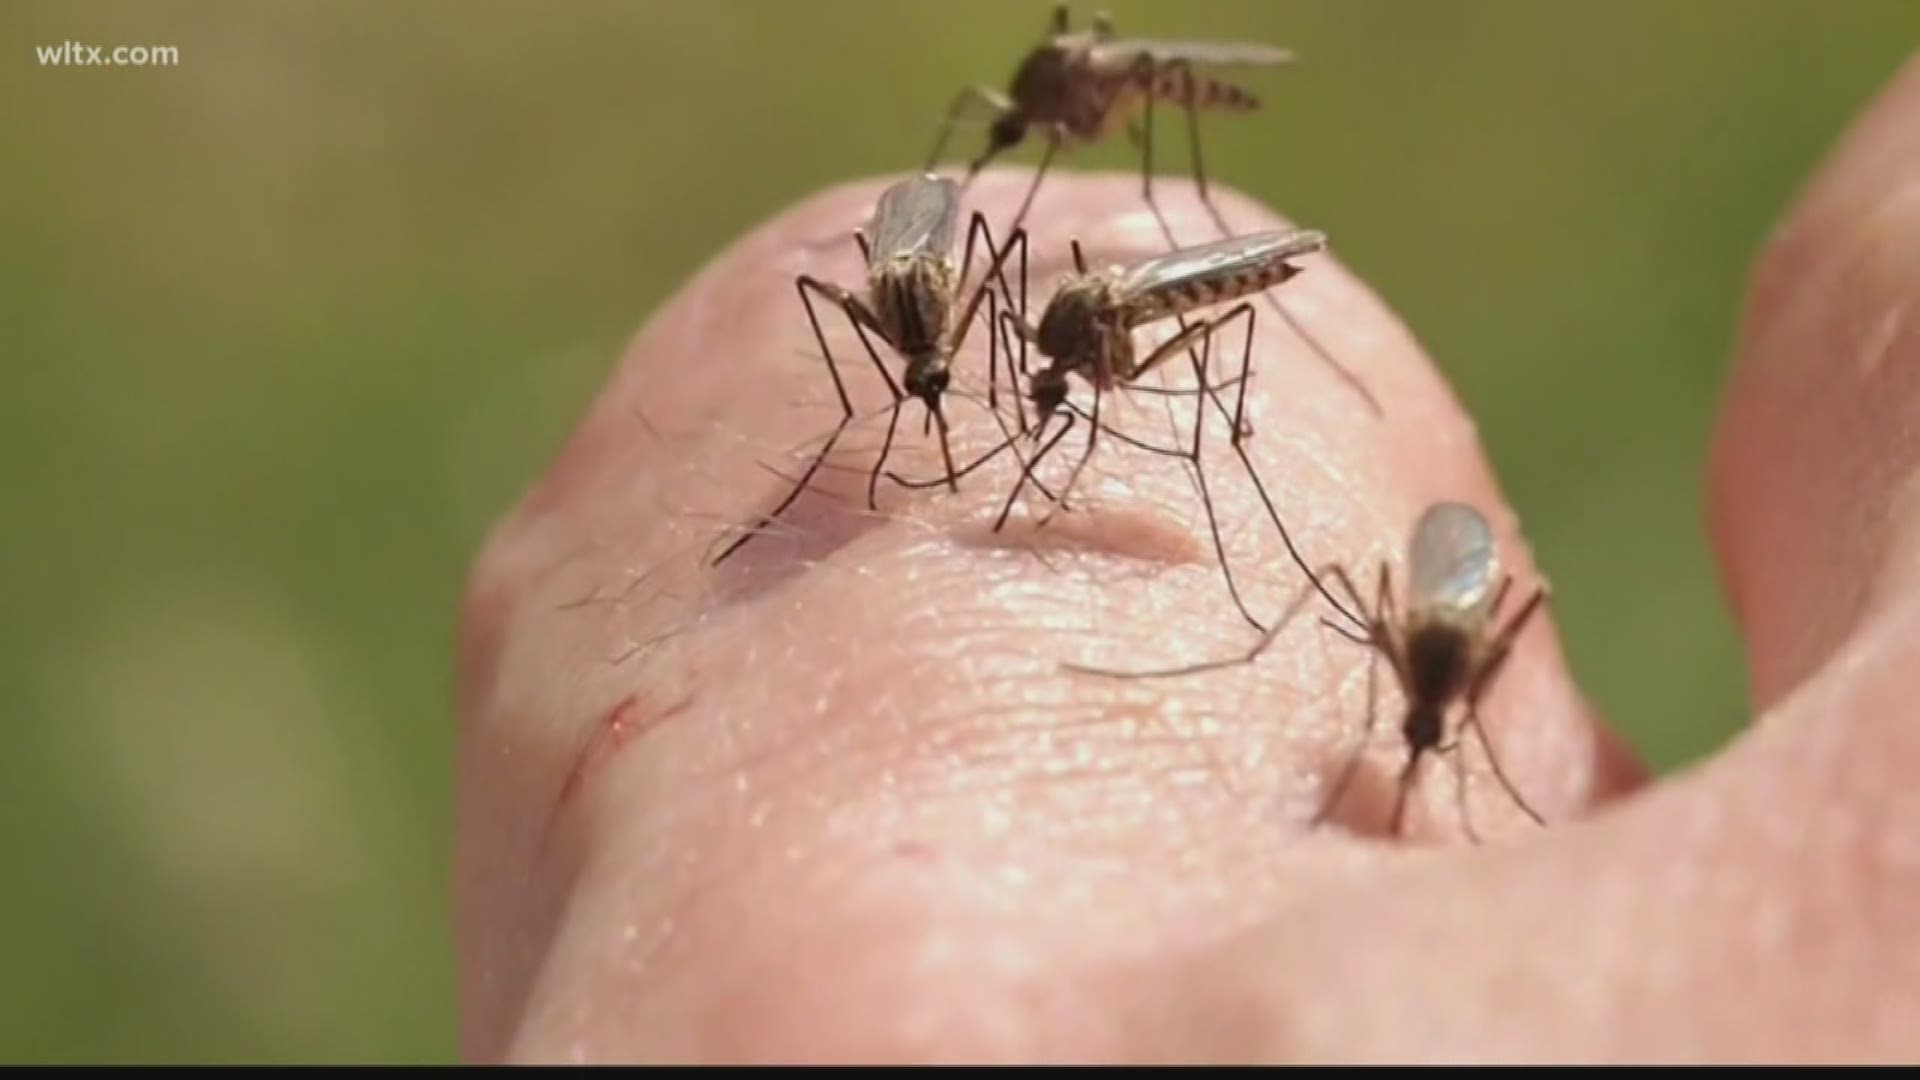 The mosquitoes were found in St. Andrews and Forest Acres area